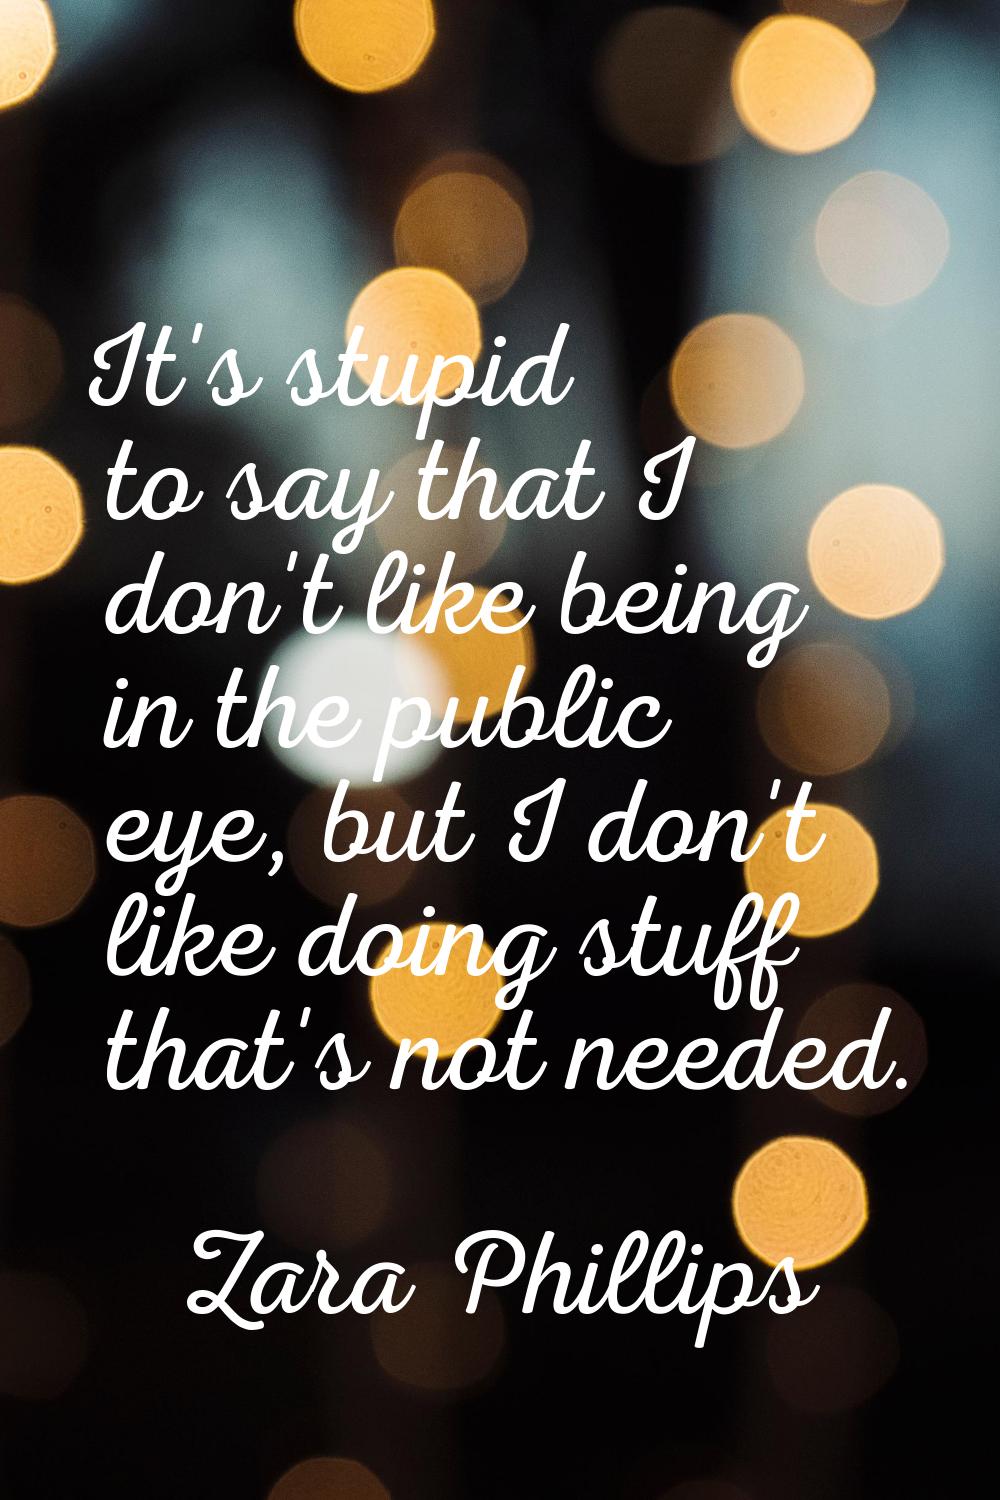 It's stupid to say that I don't like being in the public eye, but I don't like doing stuff that's n